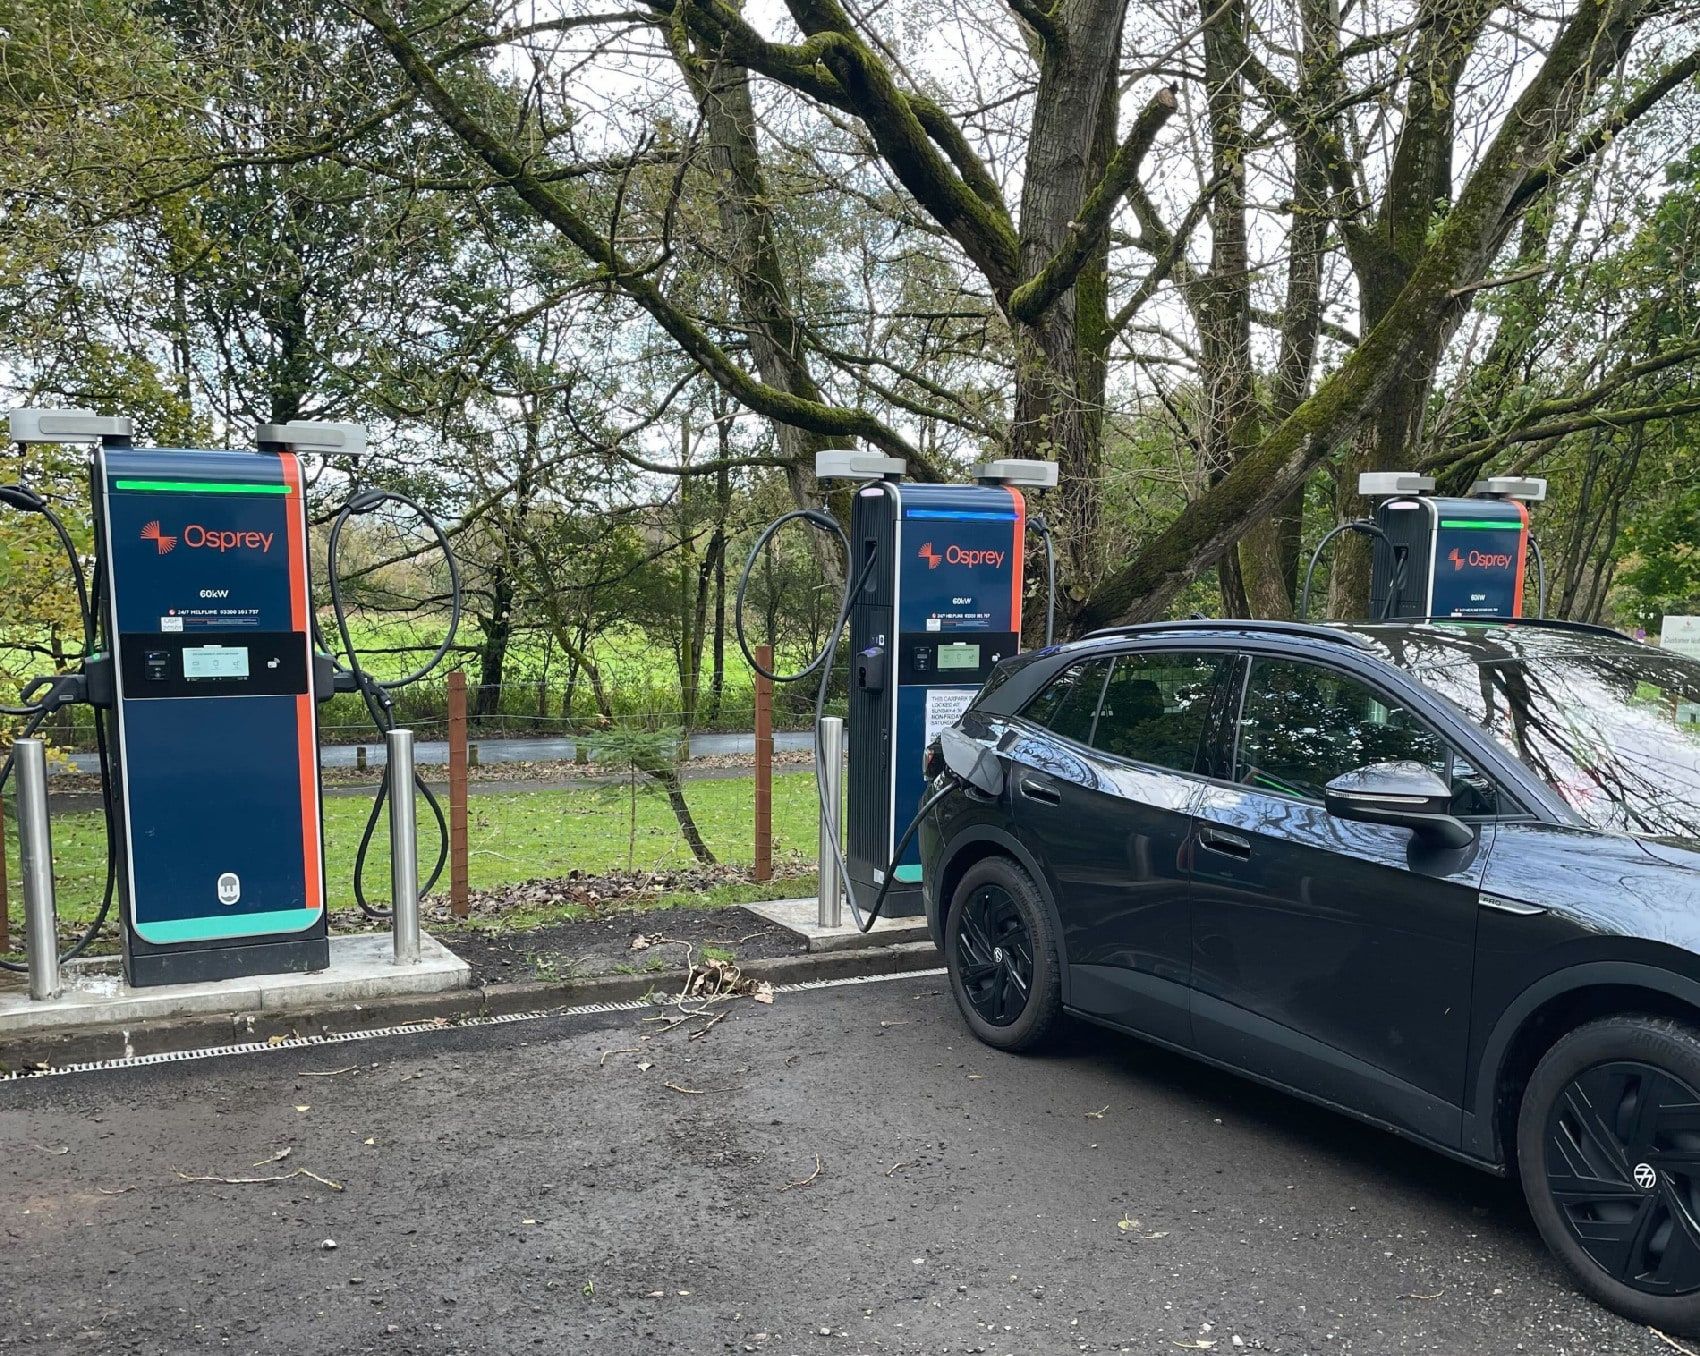 Wallbox and Osprey partner to expand reliable public charging in the UK